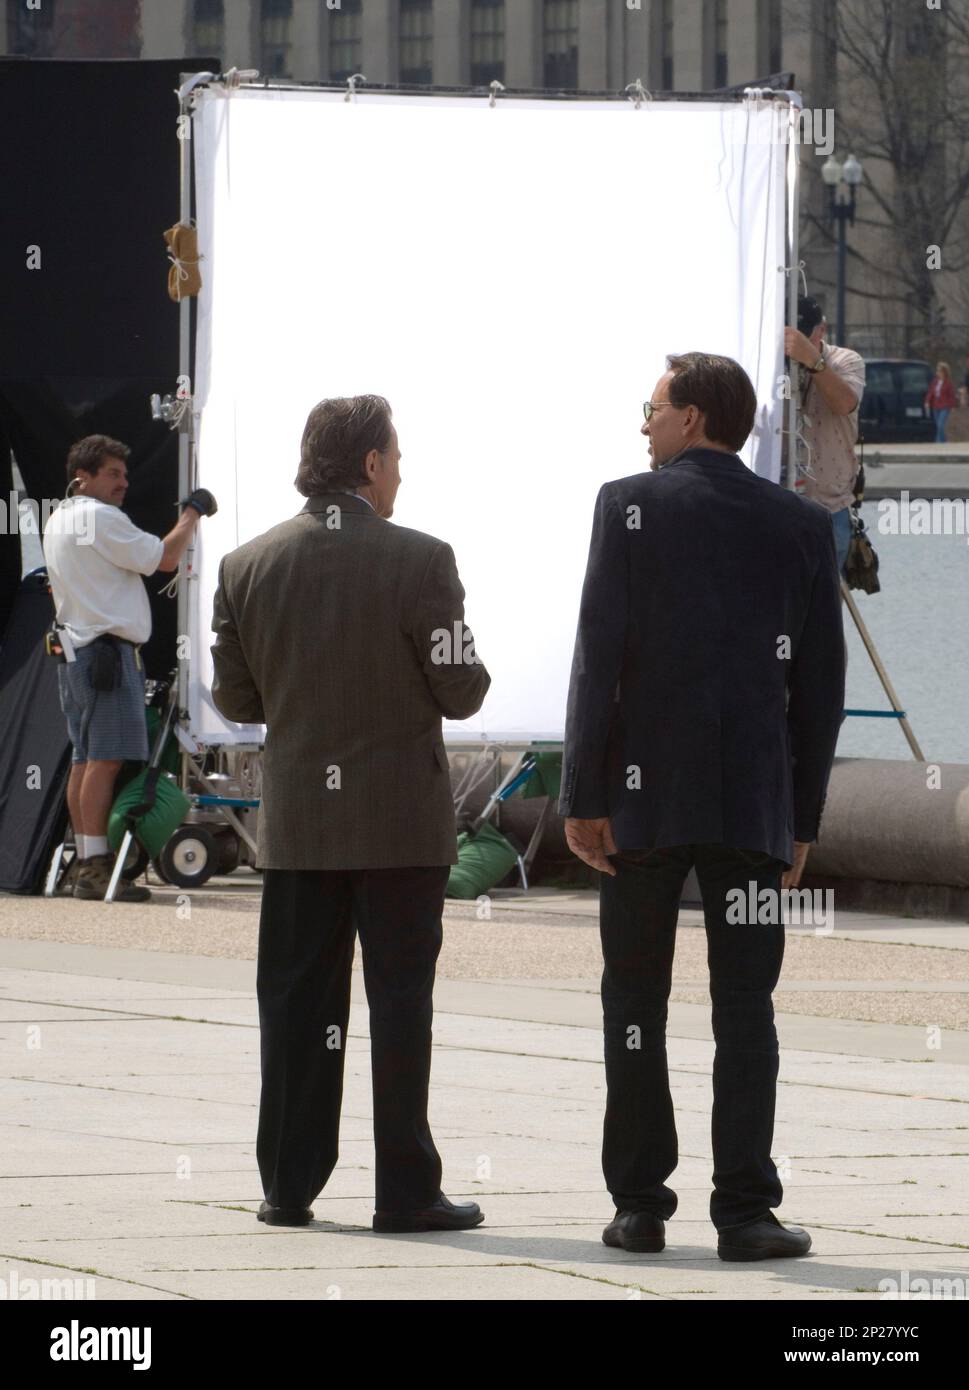 Actors Harvey Keitel, left, and Nicolas Cage, right, film a scene for the  movie "National Treasure: Book of Secrets" by the West Front reflecting  pool on Wednesday, March 28, 2007. (CQ Roll